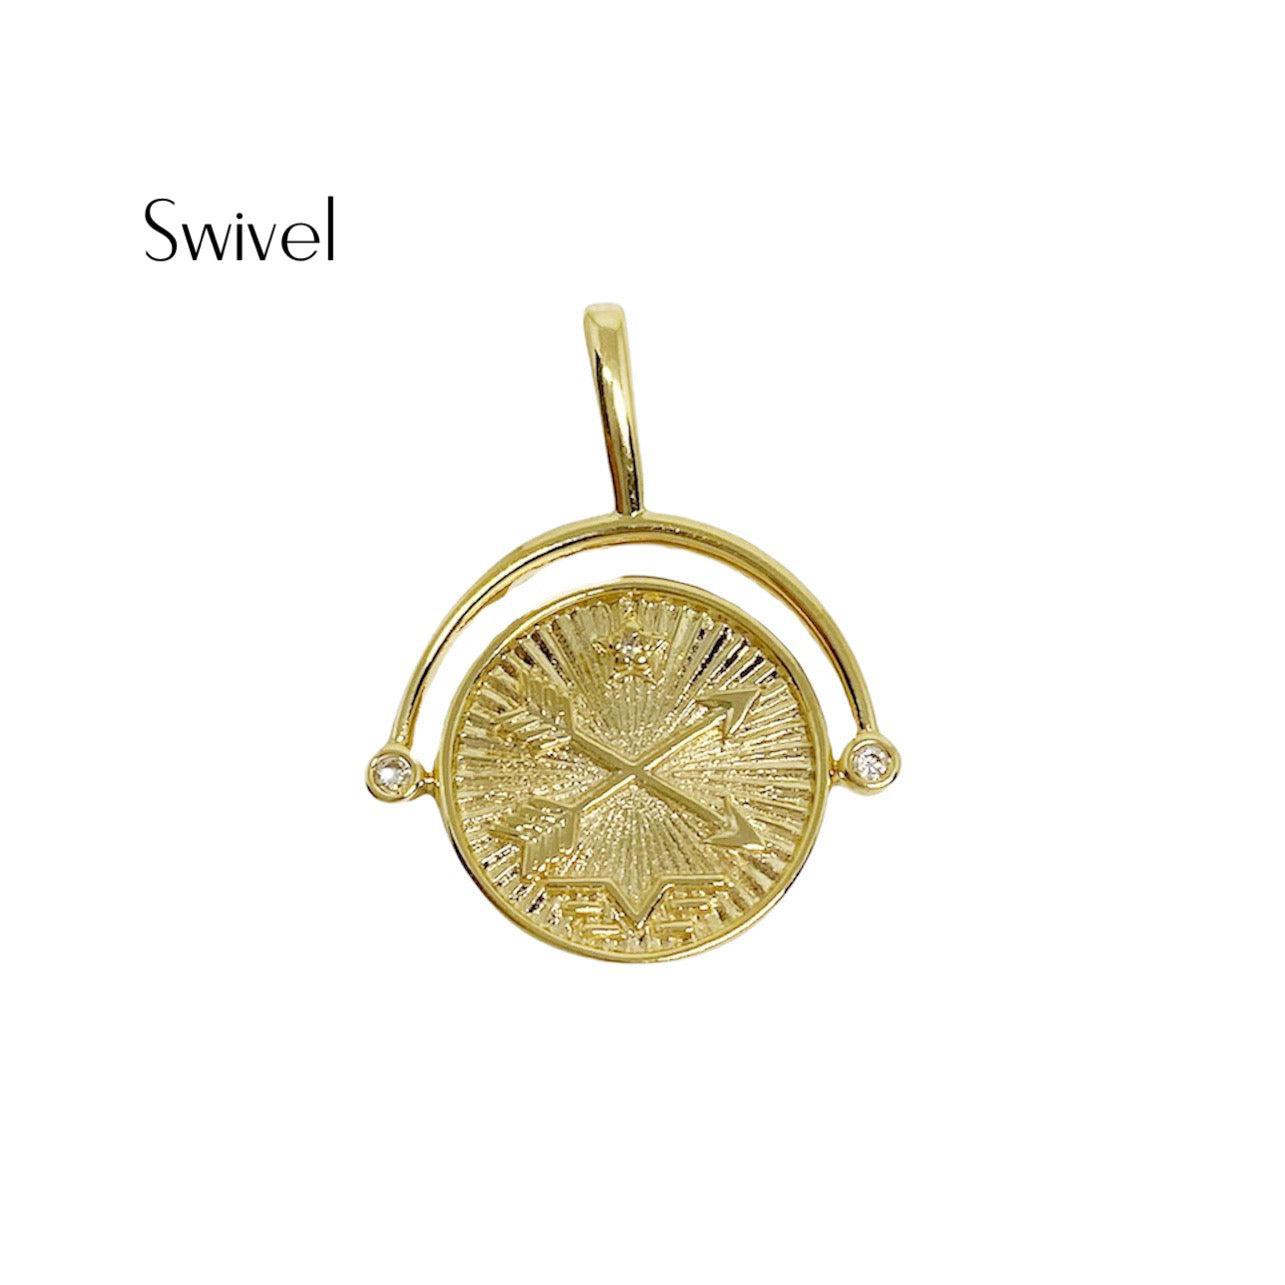 GoldFi 18k Gold Filled Swivel Compass Pendant Featuring Star Textured Background And Cardinal Points